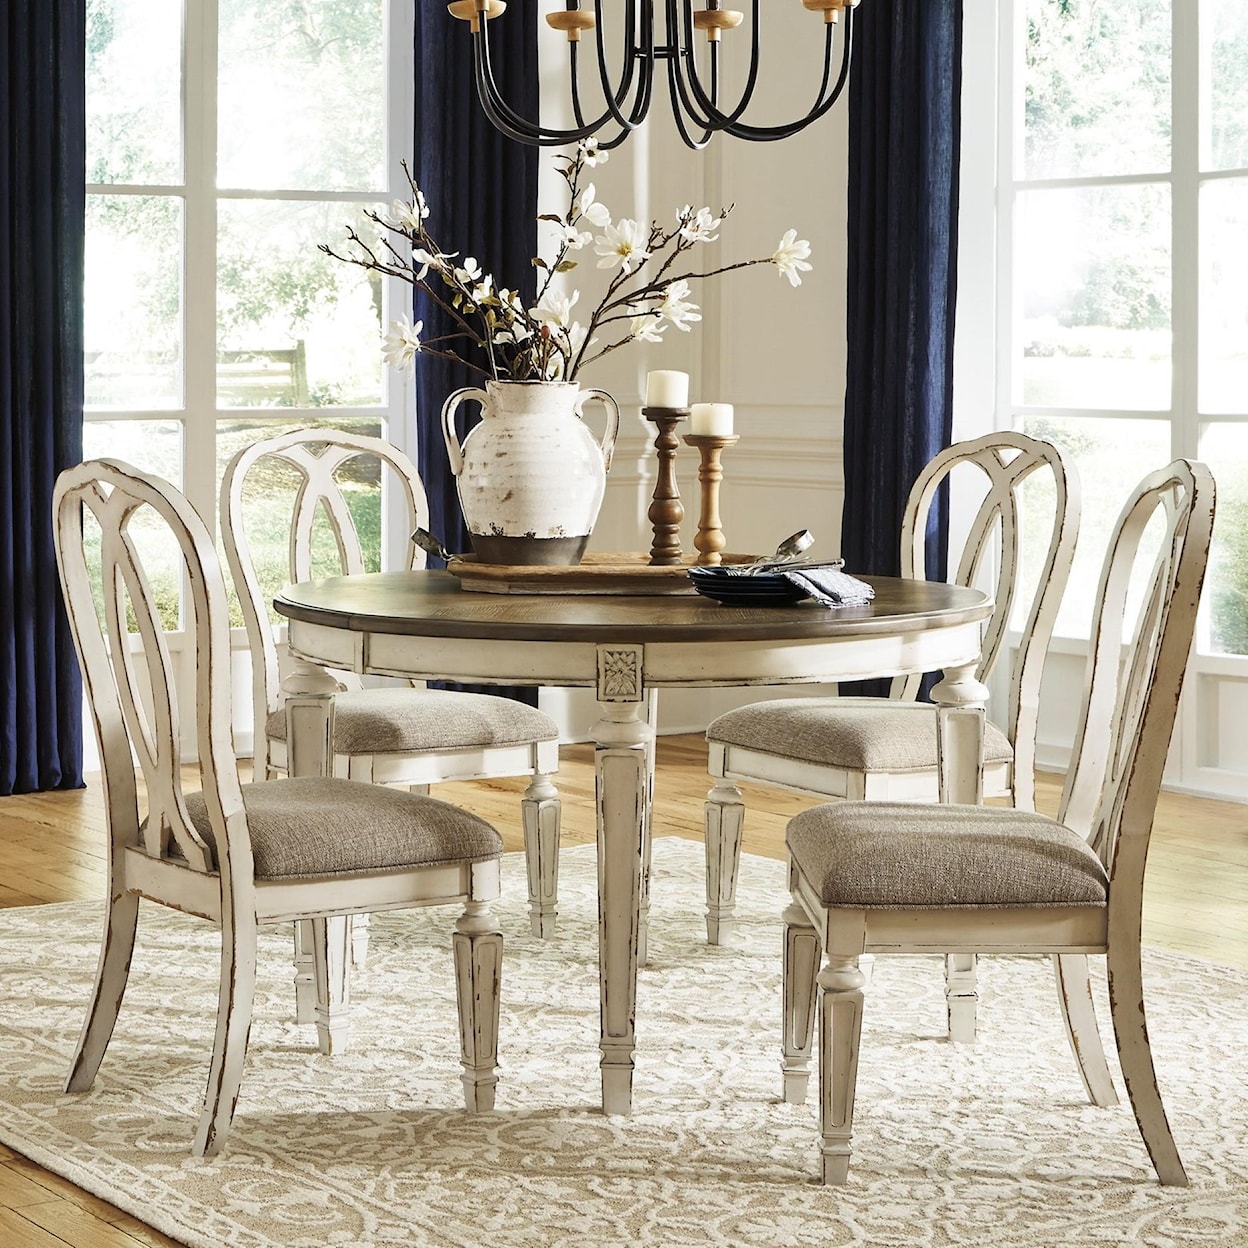 Signature Design by Ashley Furniture Realyn 5-Piece Table and Chair Set